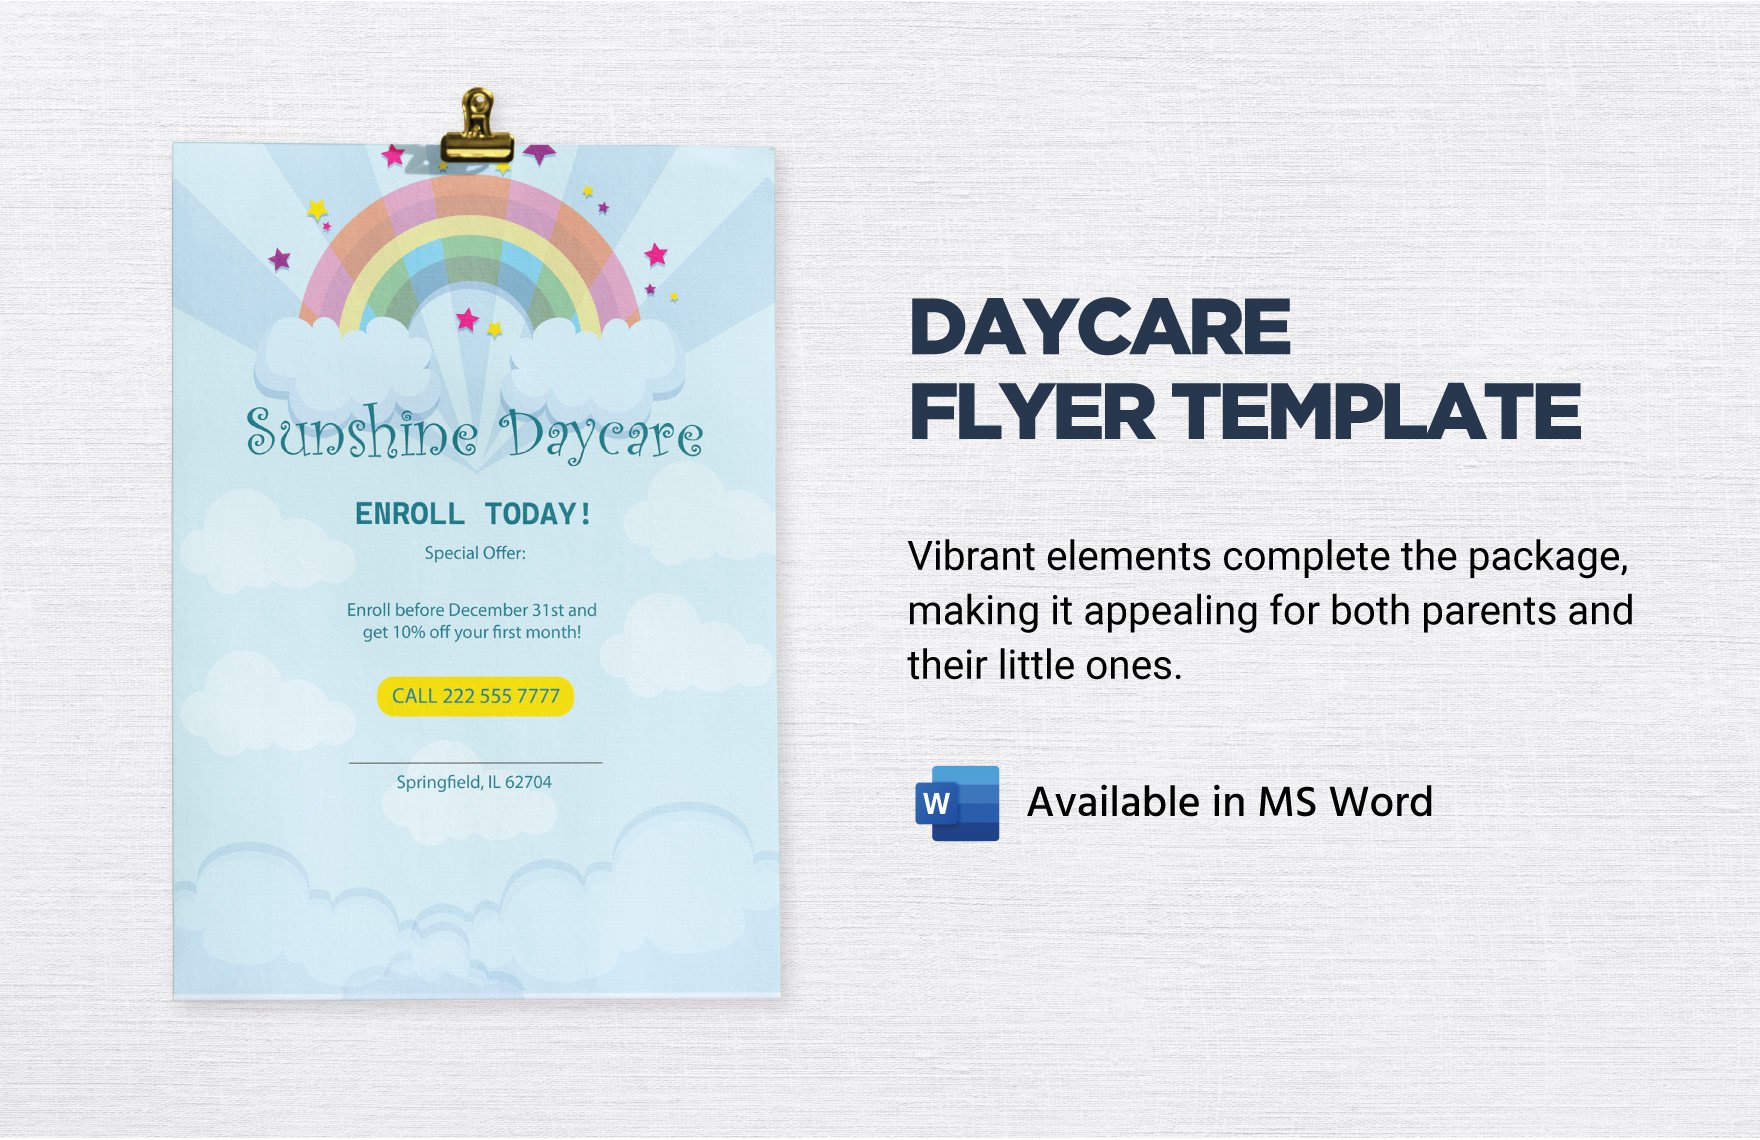 Daycare Flyer Template in Word, Publisher